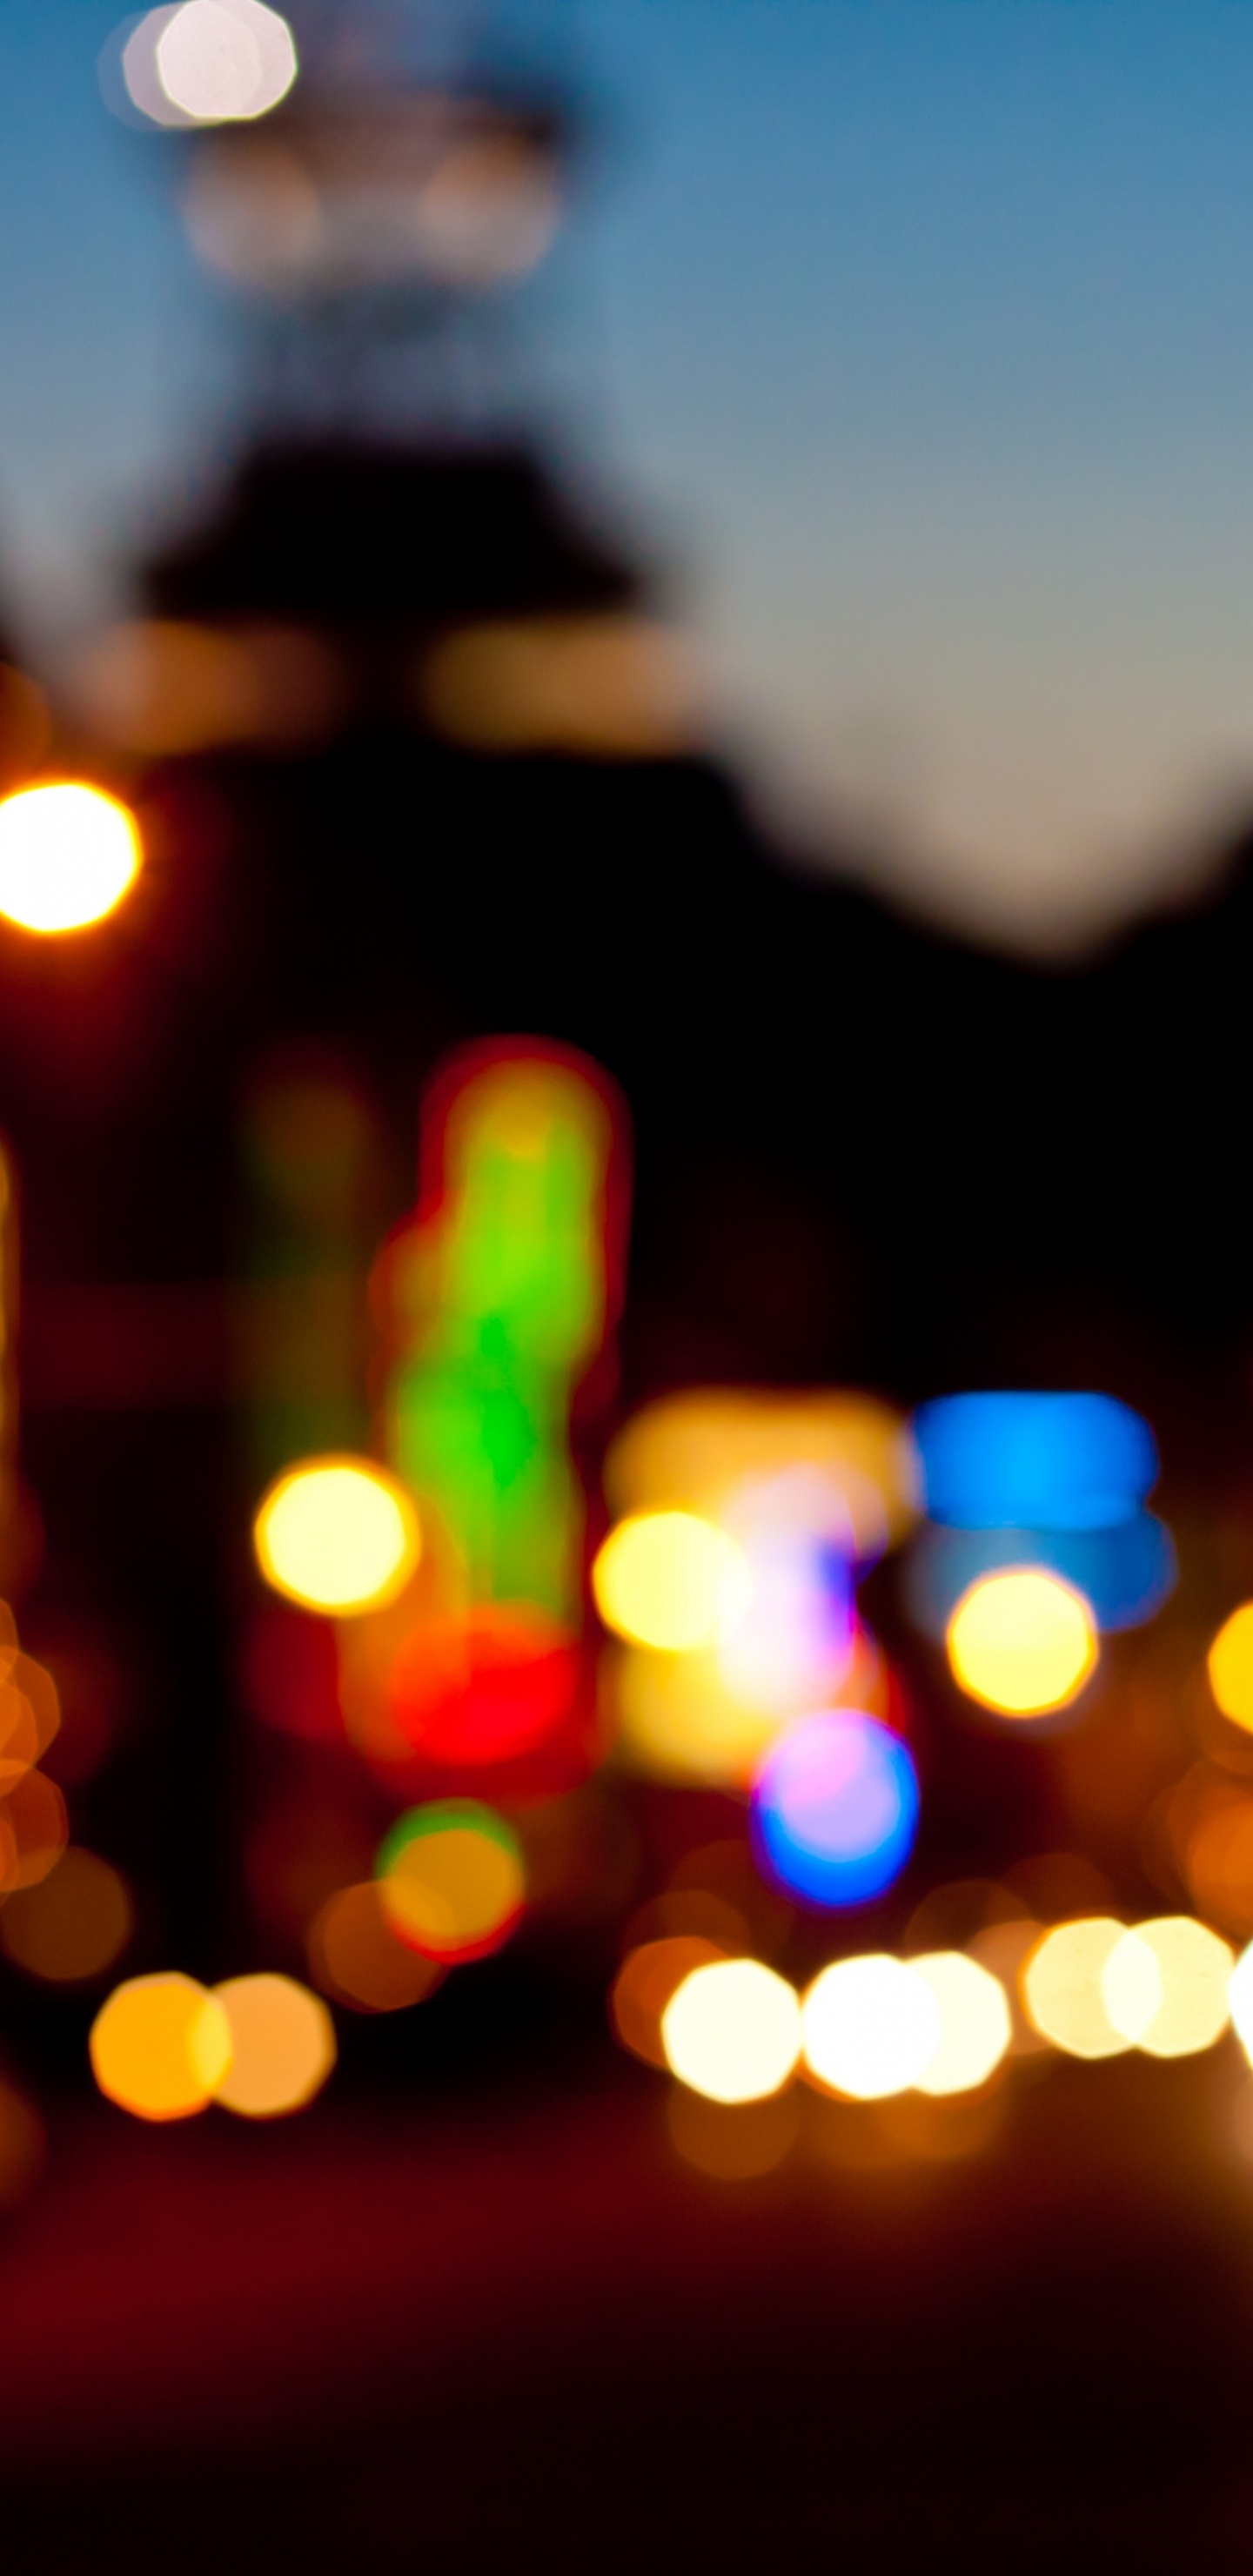 Bokeh Photography of City Lights During Night Time. Wallpaper in 1440x2960 Resolution